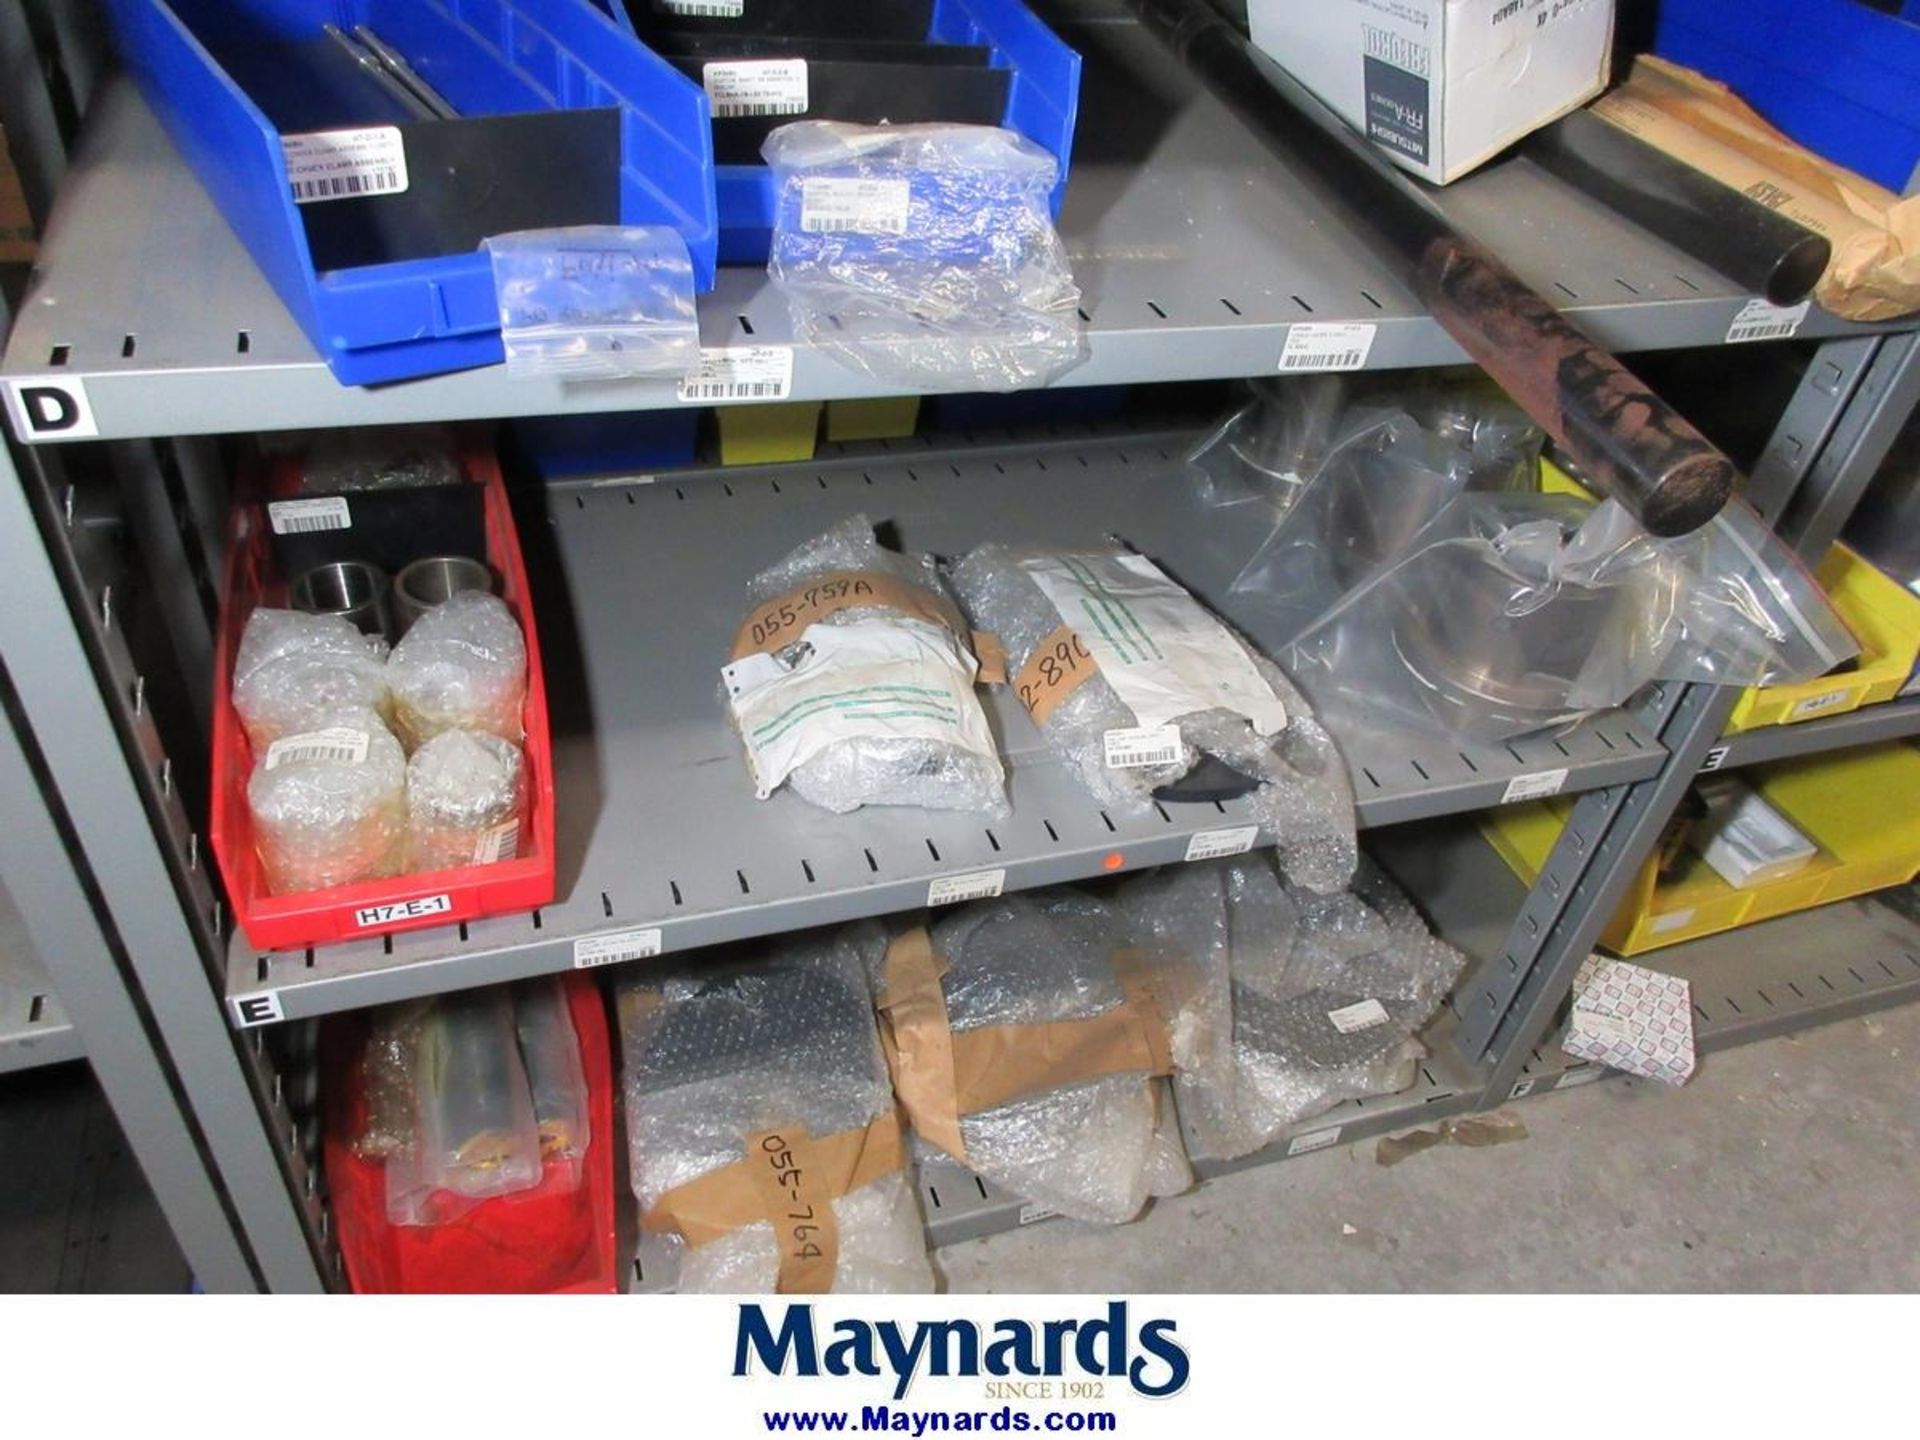 Large Lot of Electrical Controls, PLC's, Drives & Remaining Contents of Maint. Parts Crib - Image 52 of 107